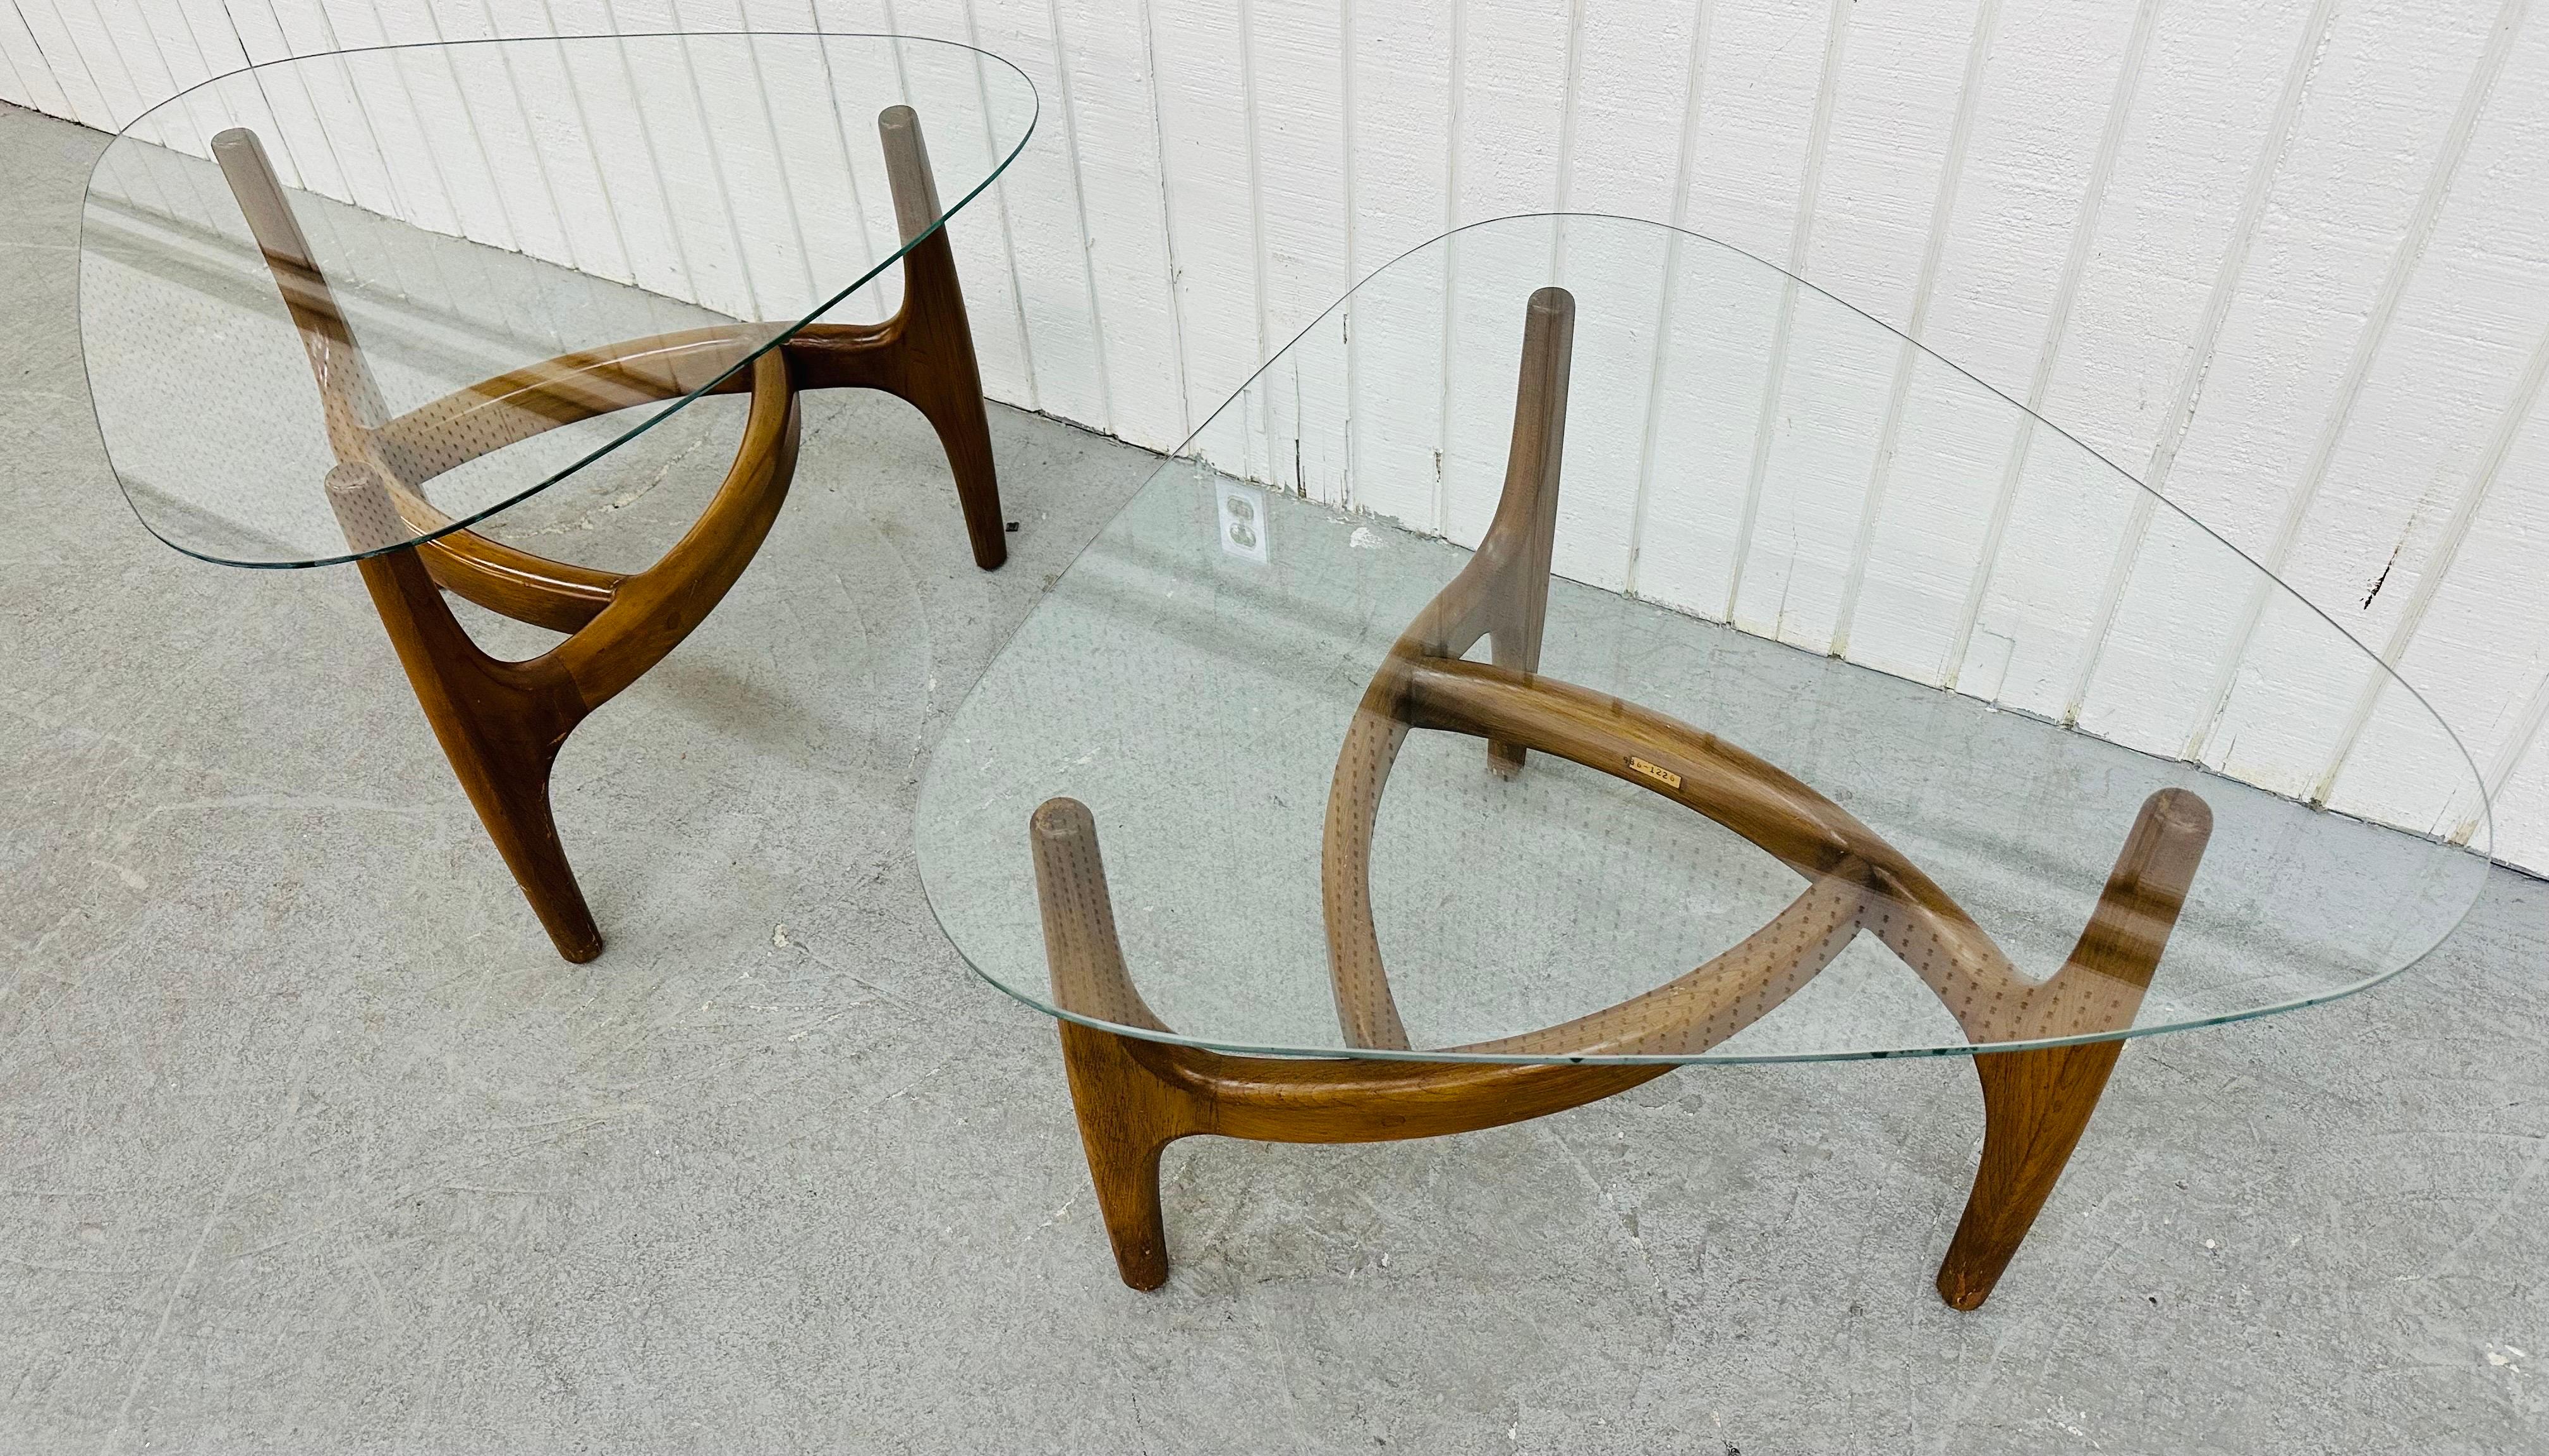 This listing is for a pair of Mid-Century Modern Sculpted Walnut Glass Top Side Tables. Featuring a sculpted curved wooden base, rounded triangular glass tops, and a beautiful walnut finish. This is an exceptional combination of quality and design